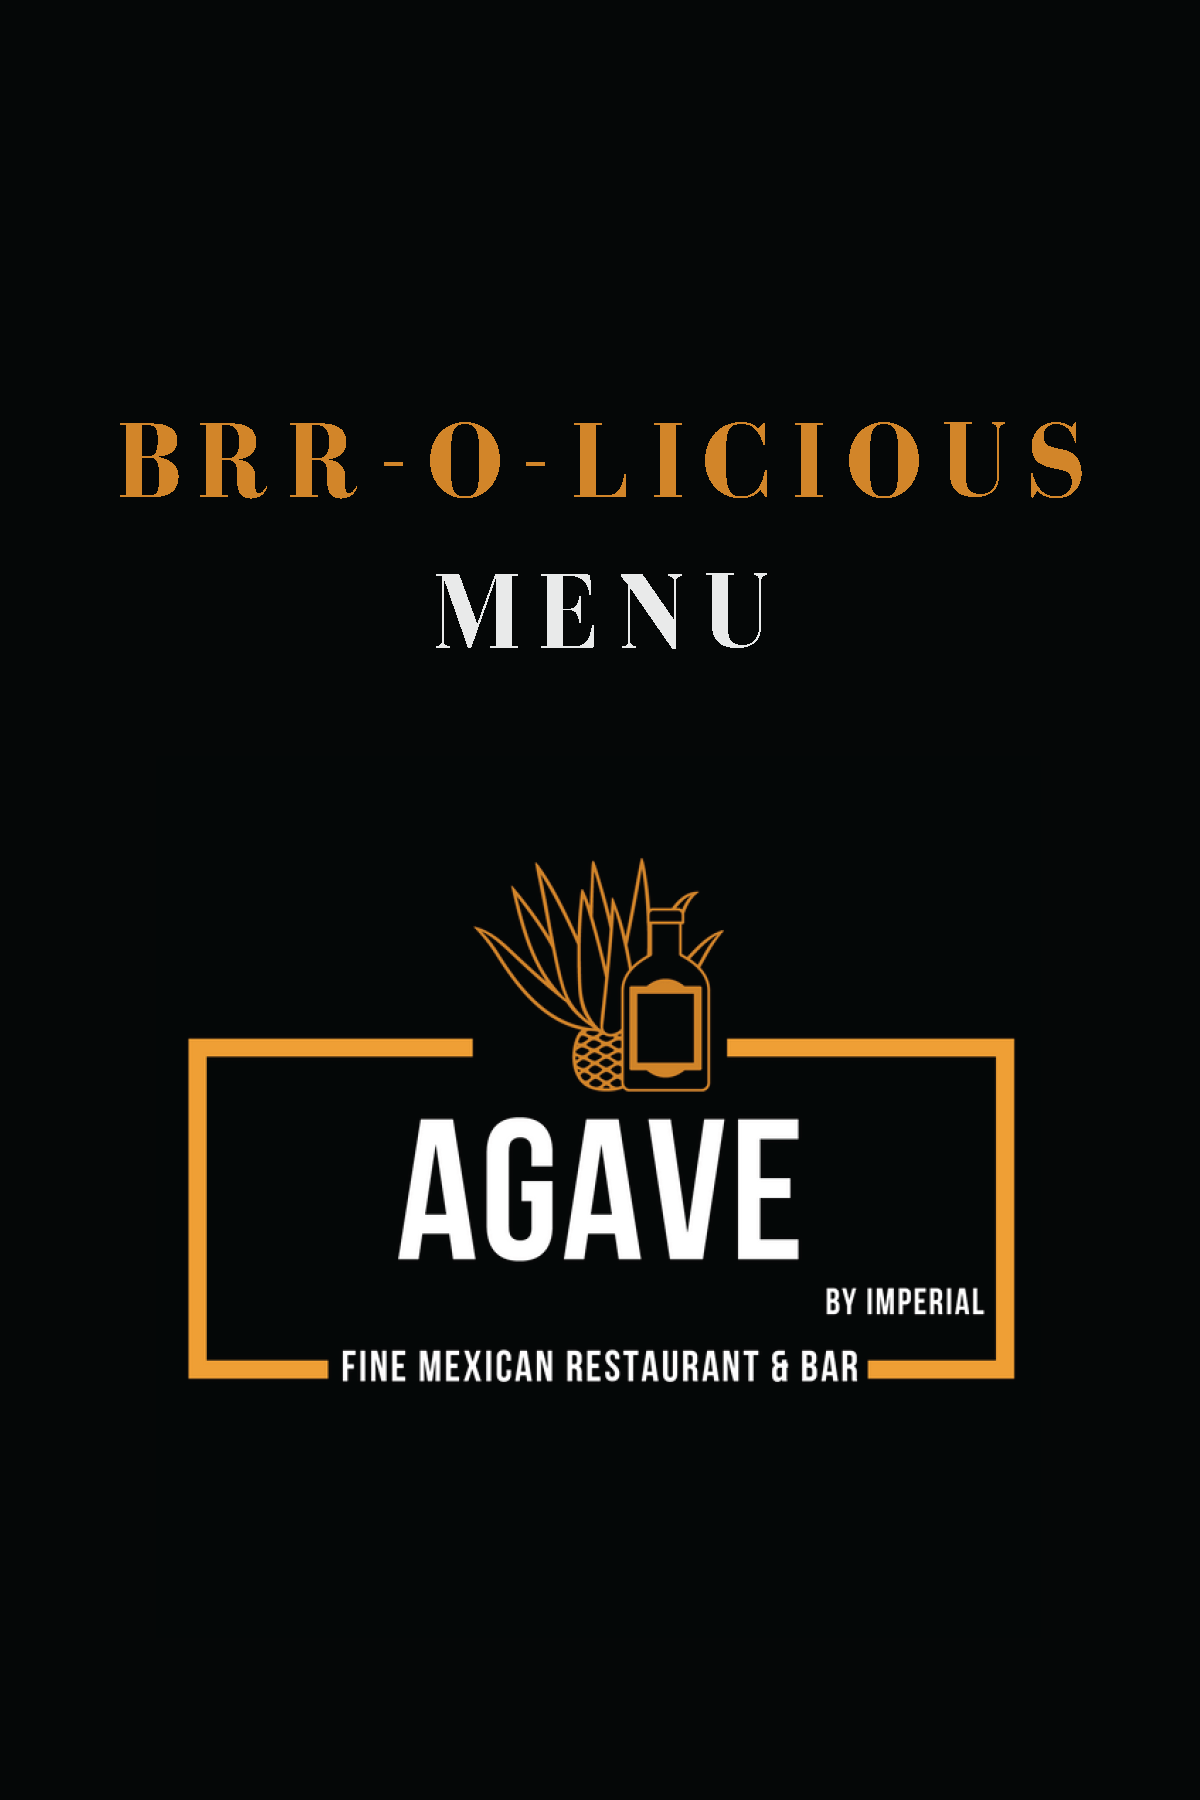 Brrr-O-Licious Menu at Agave

Black with white and gold text and Agave by Imperial Logo